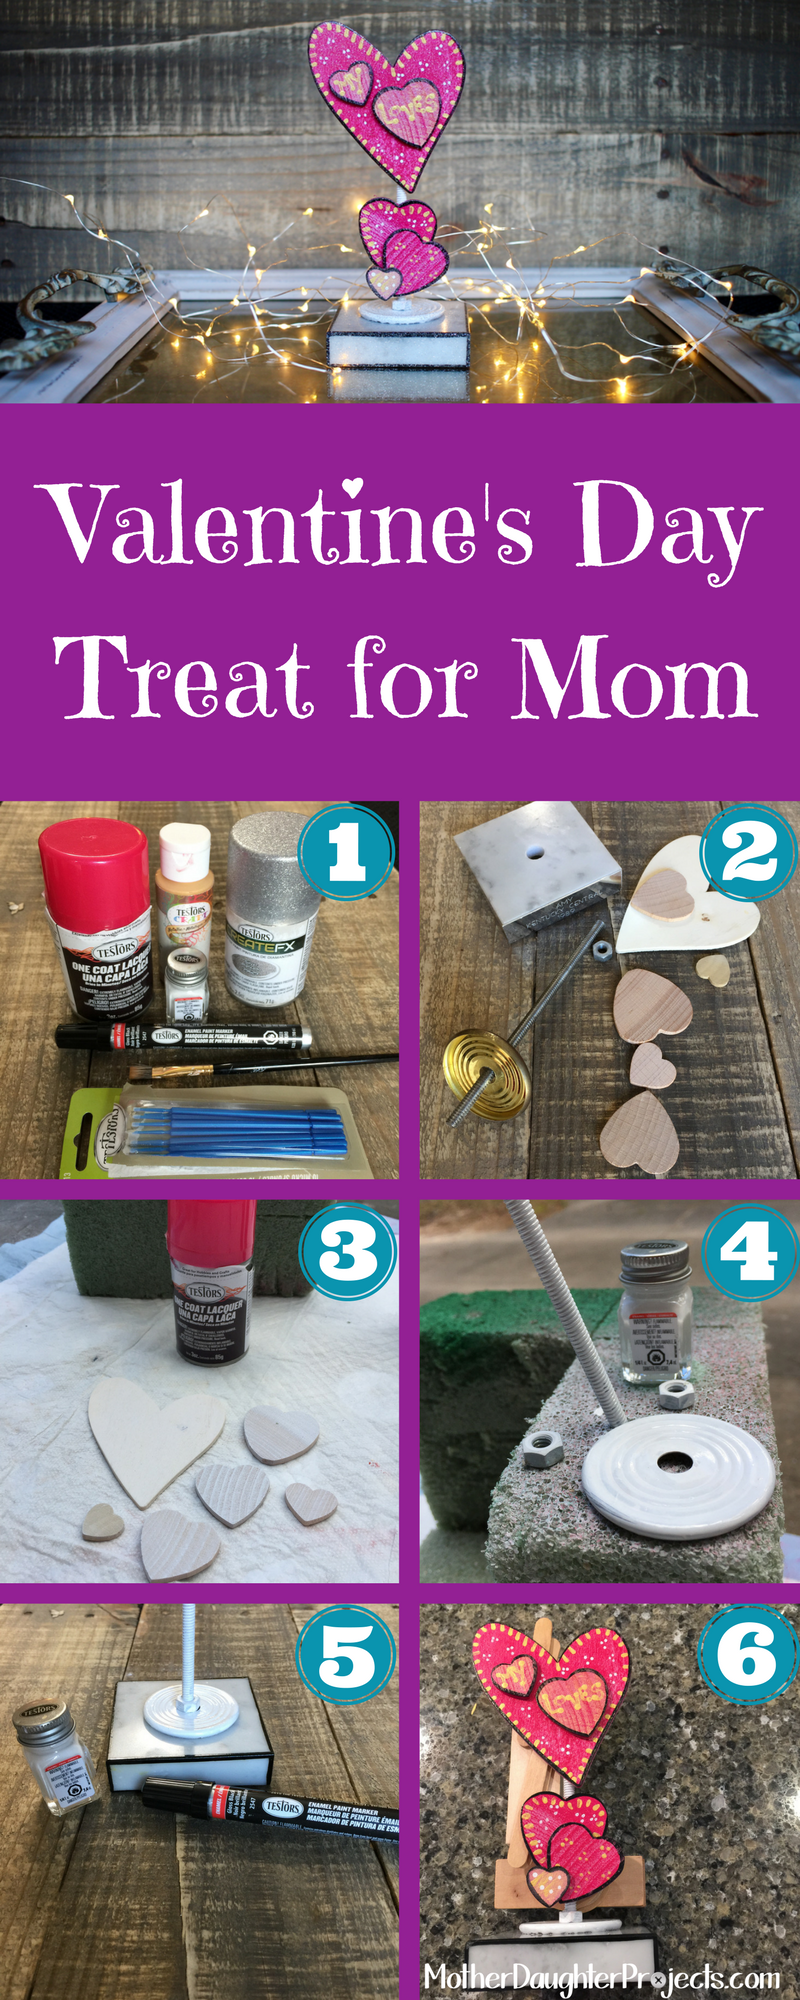 Learn how to make a unique, handmade and personal gift for Valentine's Day. Great for kids to make for Mom!